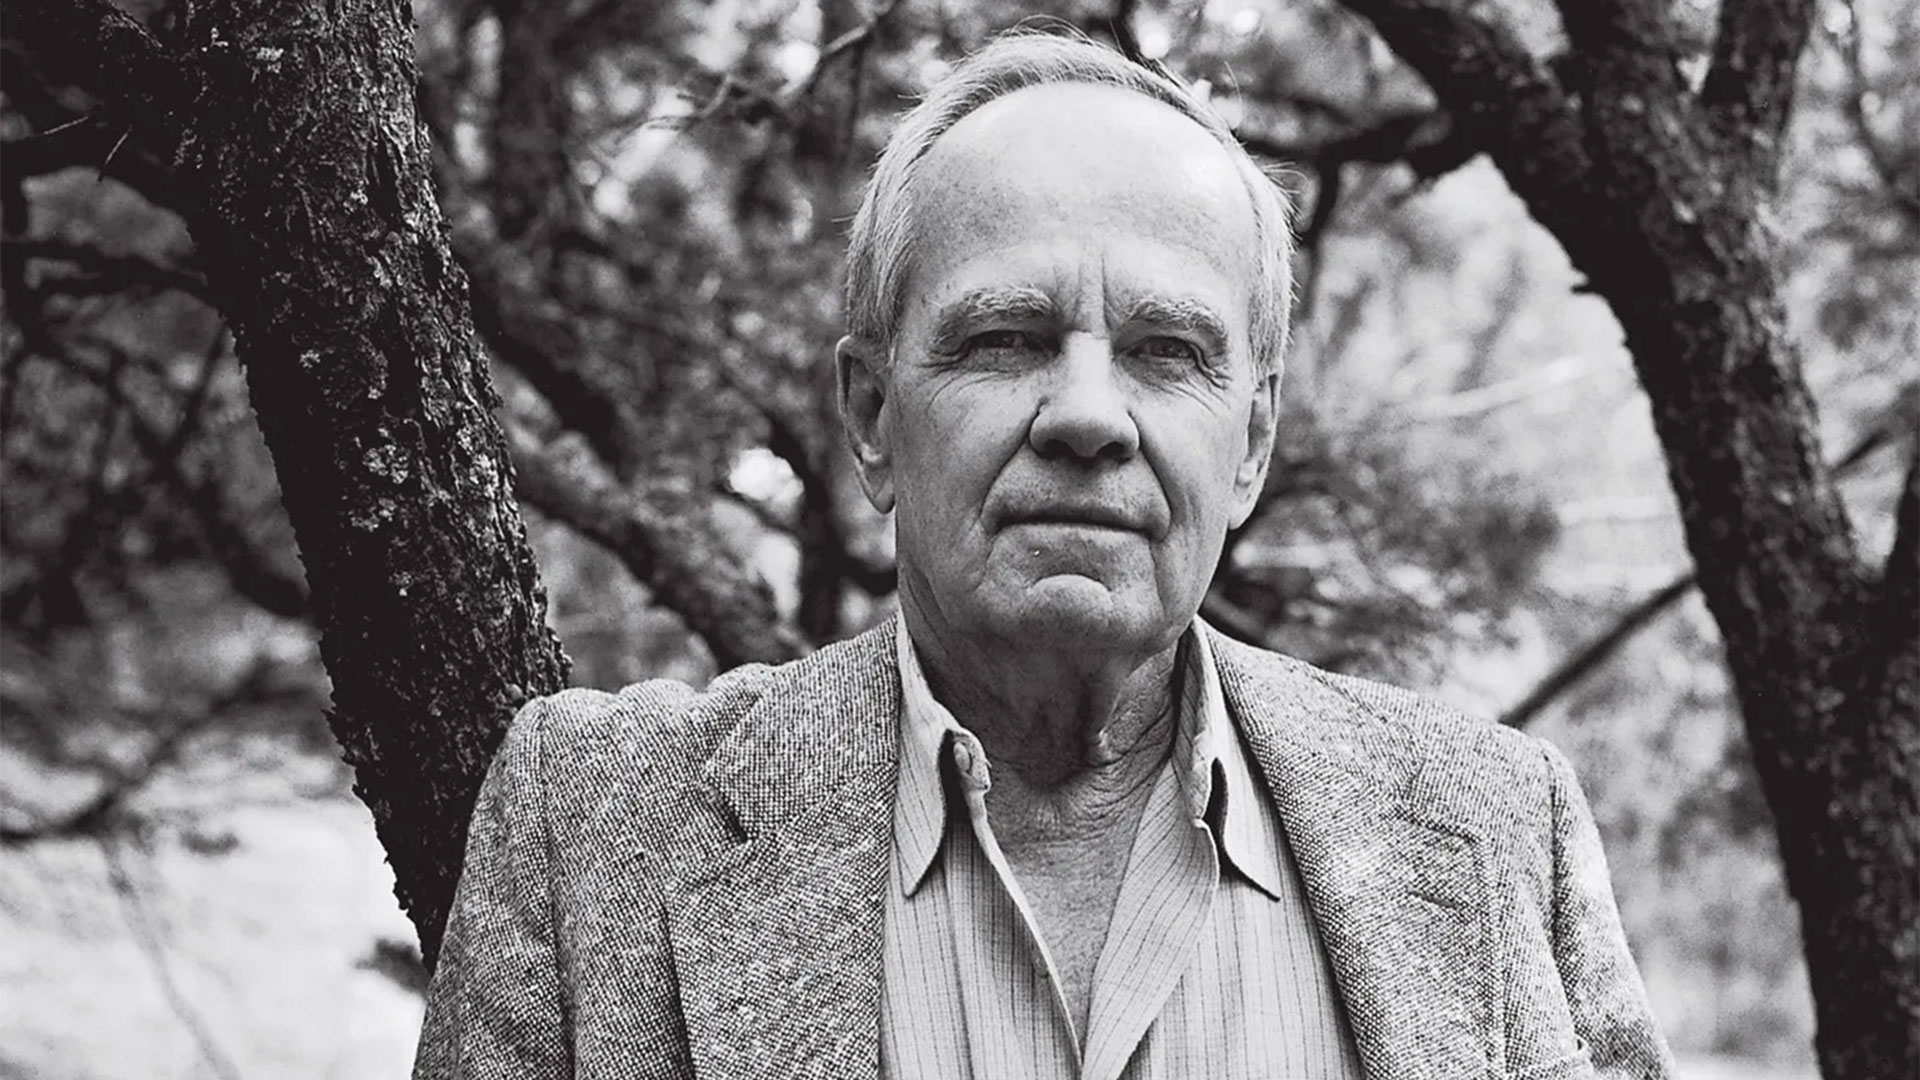 Remembering Author Cormac McCarthy – Glenside Library